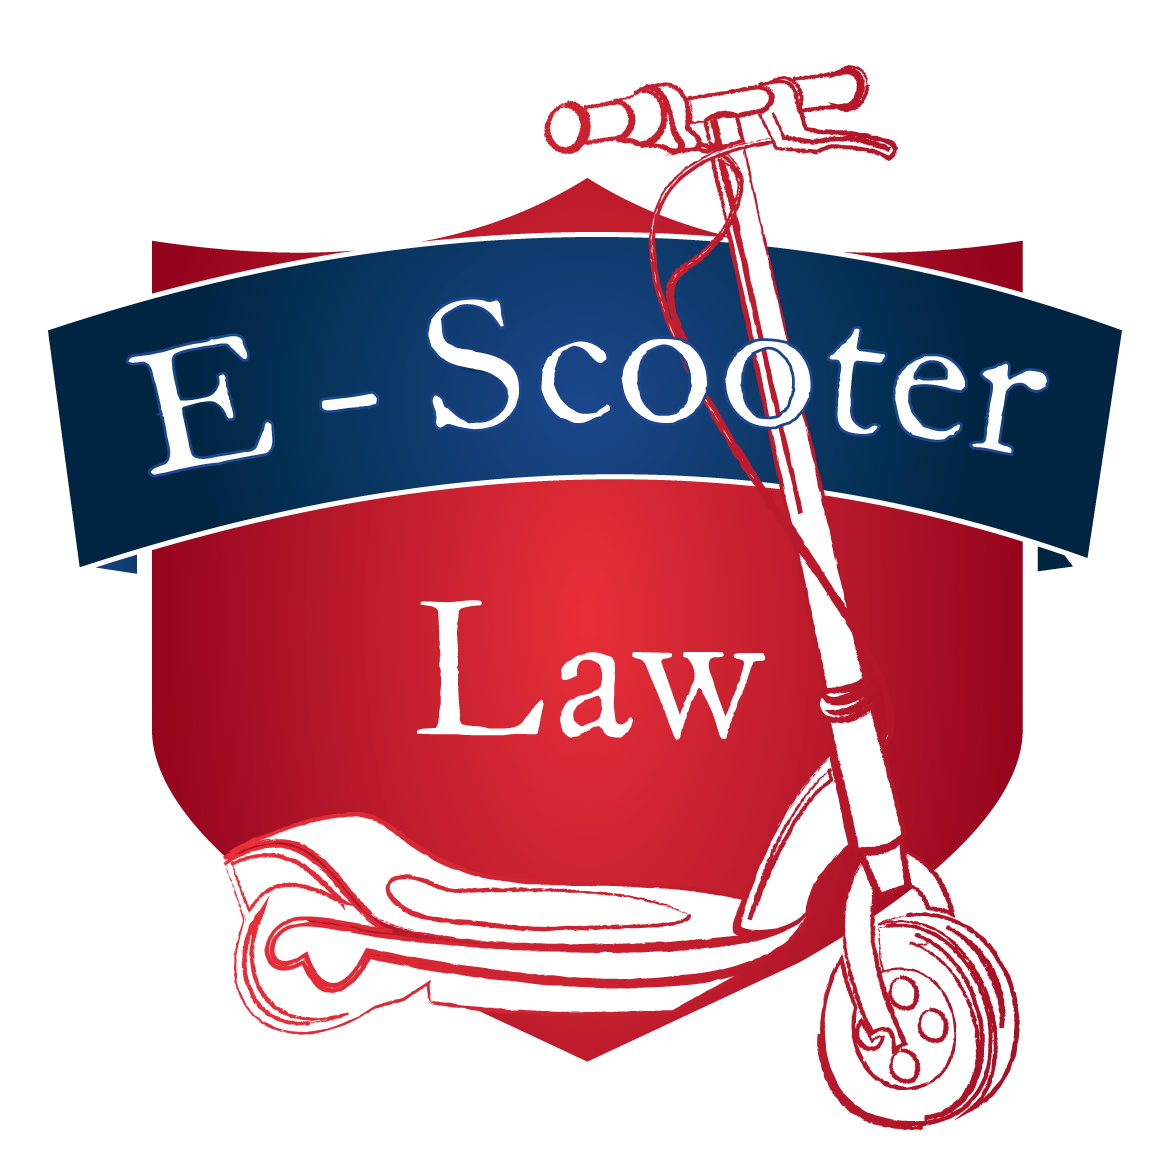 Electric Scooter Law